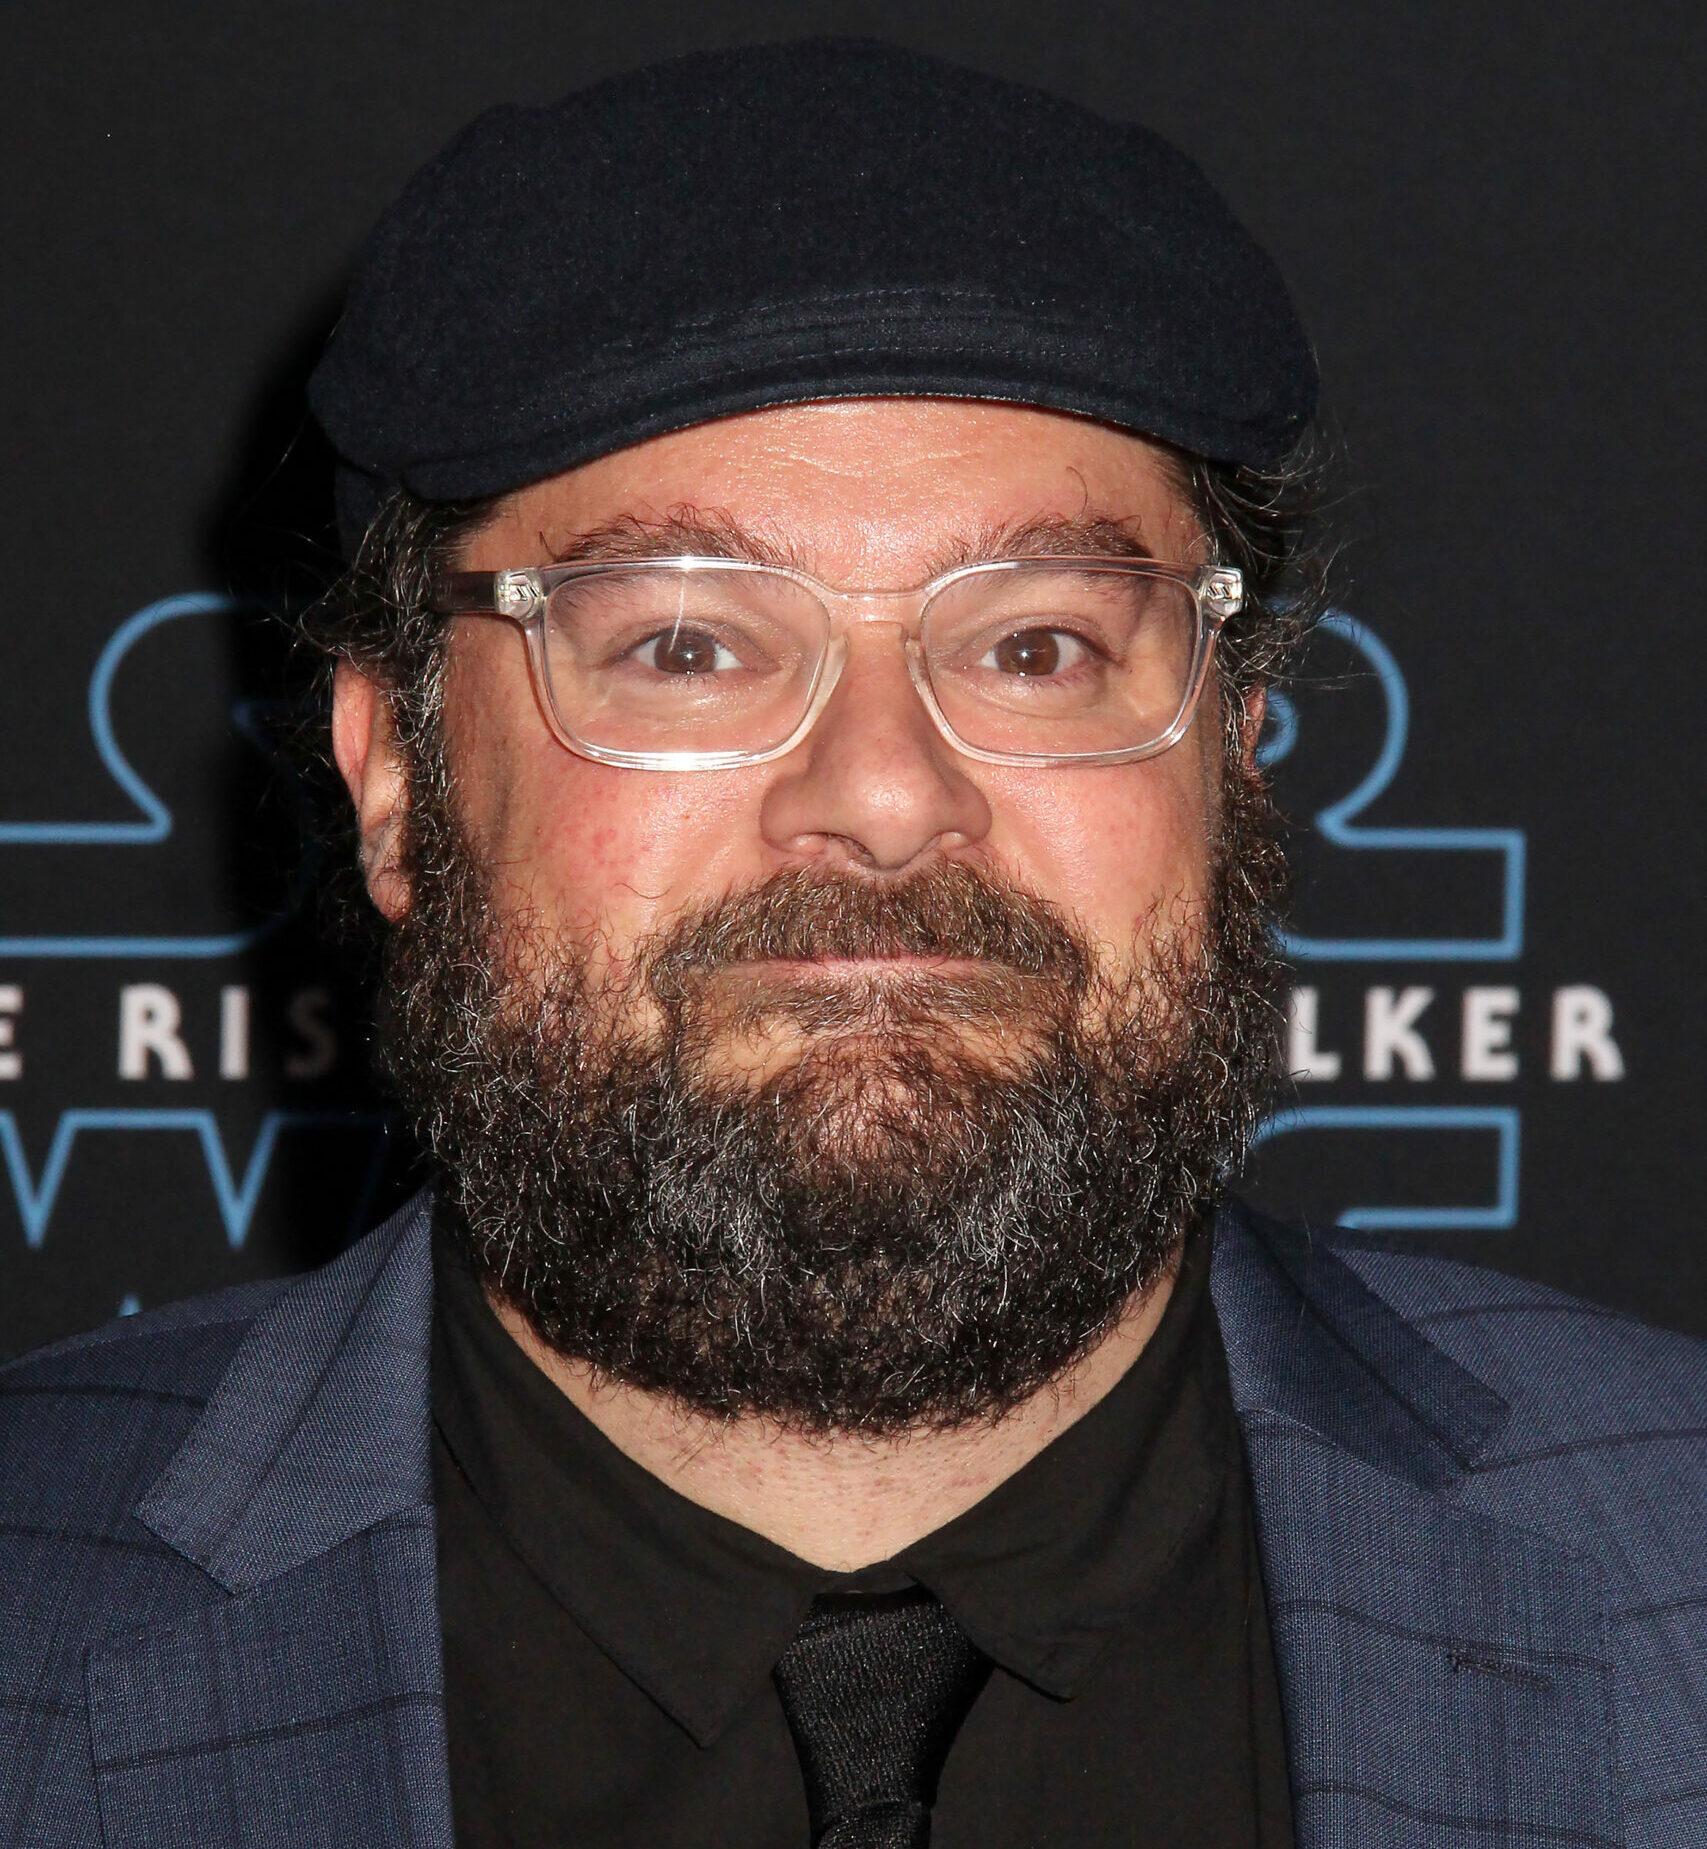 Bobby Moynihan 12/16/2019 “Star Wars: The Rise of Skywalker” Premiere held at the Dolby Theatre in Hollywood, CA